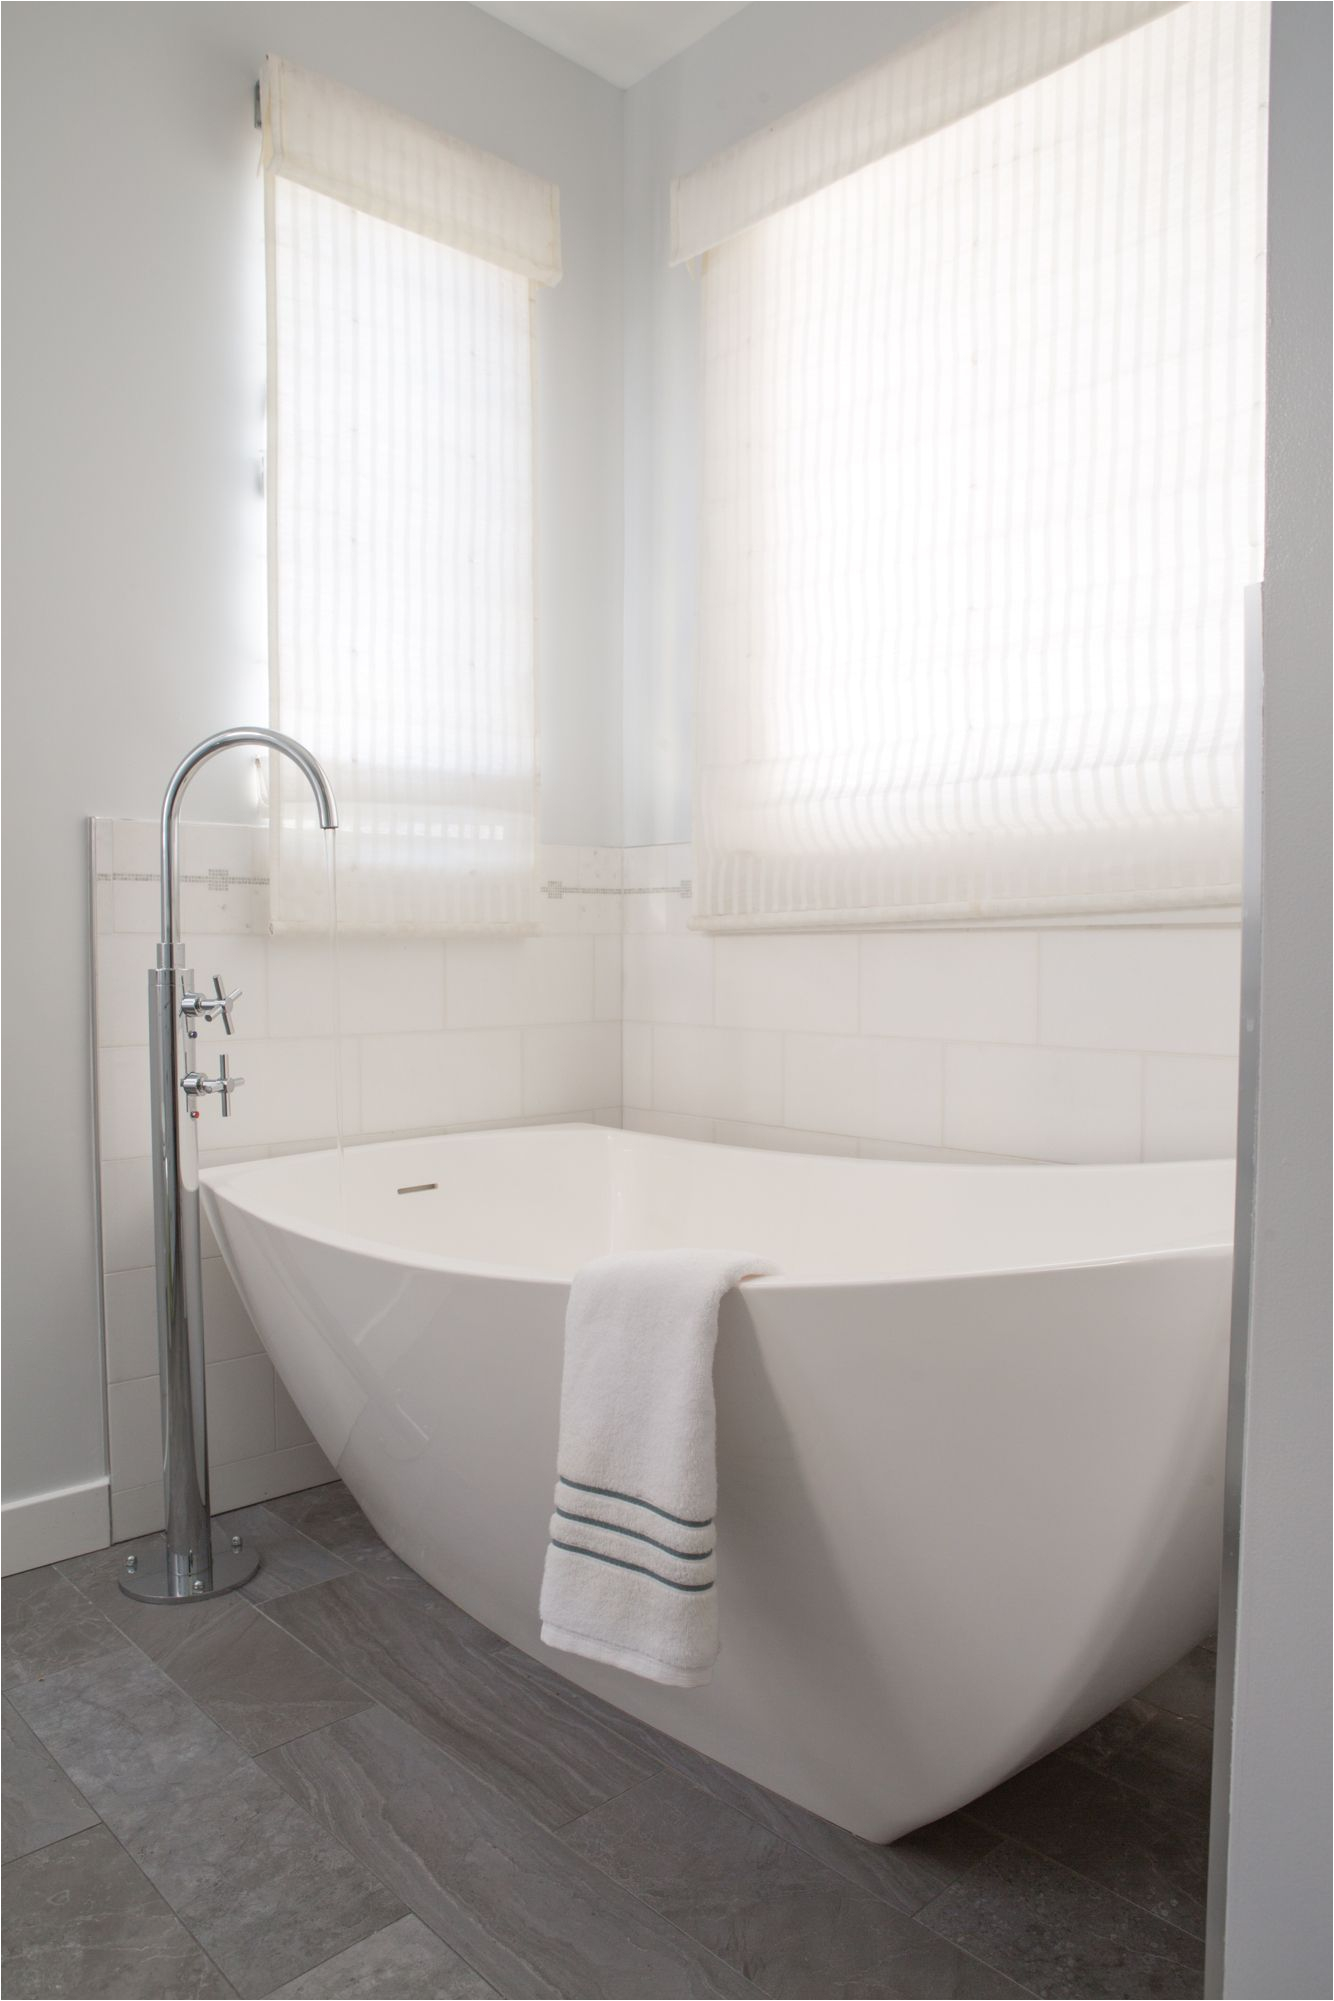 Free Standing Bathtubs Cheap Free Standing Tub with Floor Mount Tub Filler